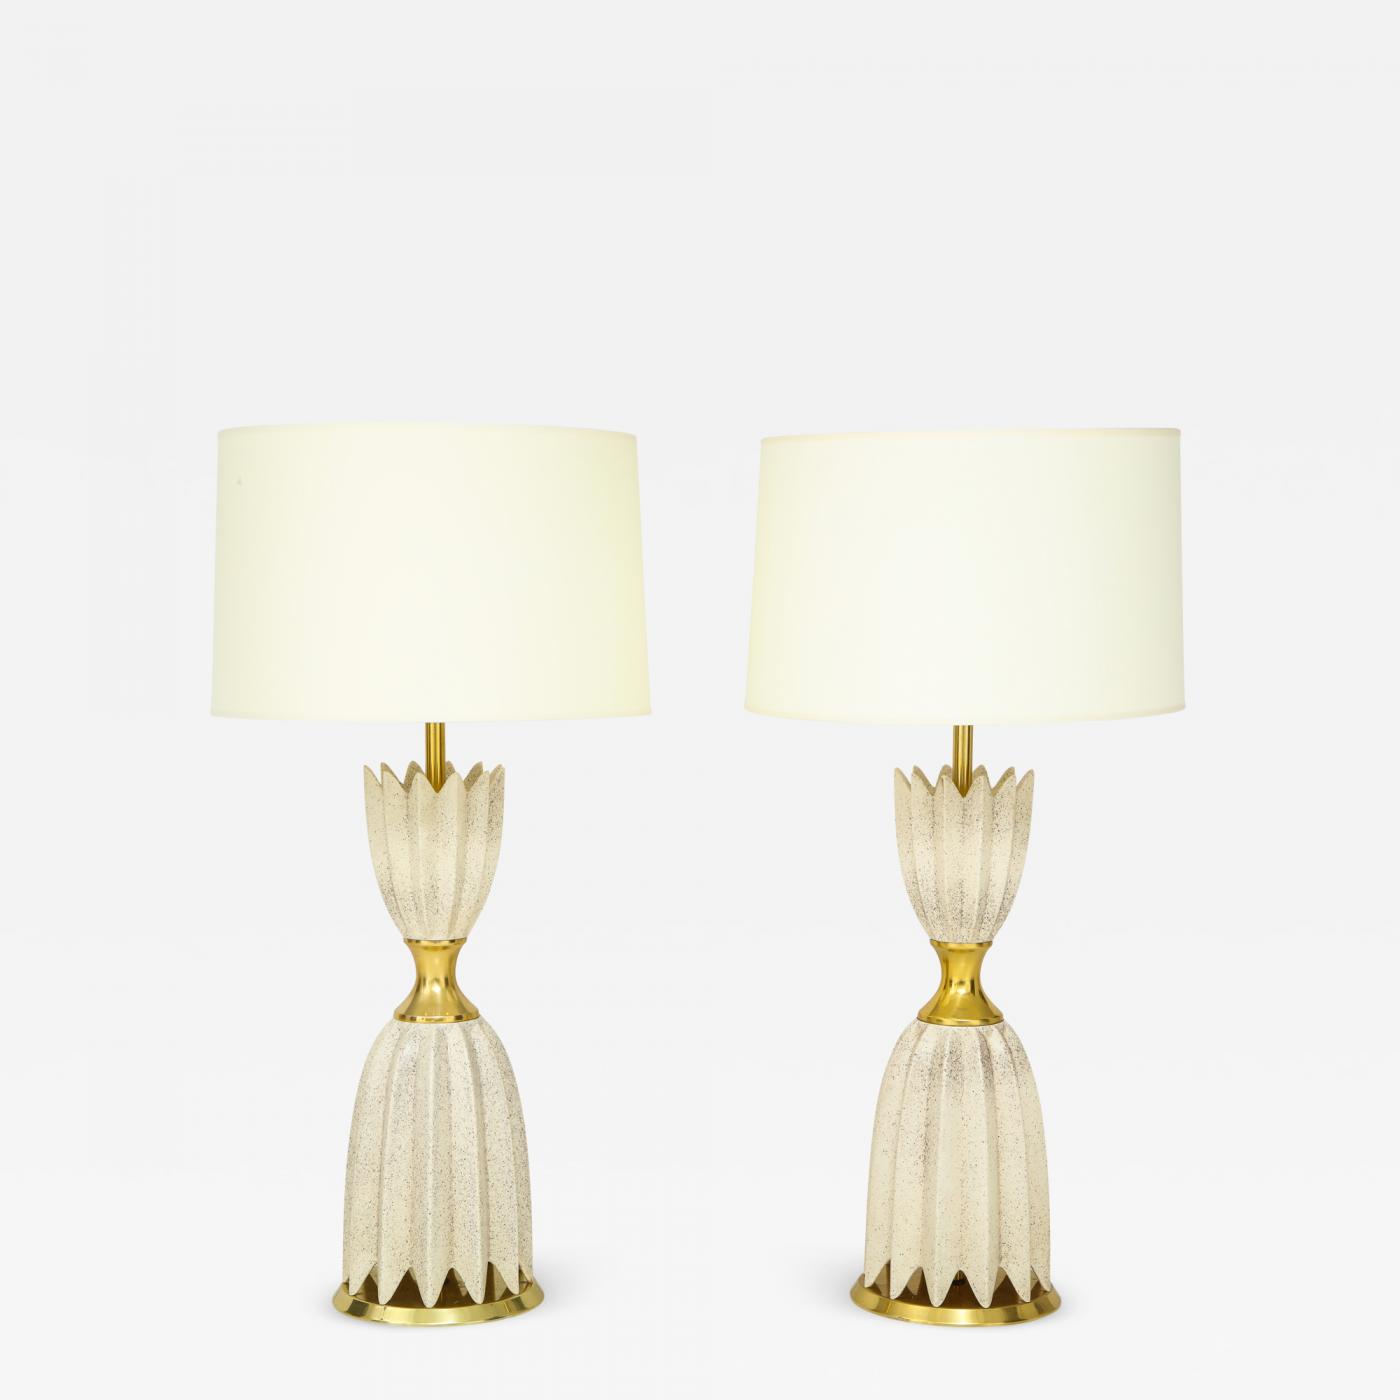 Pair of Ceramic Lamps by Gerald Thurston for Lightolier.